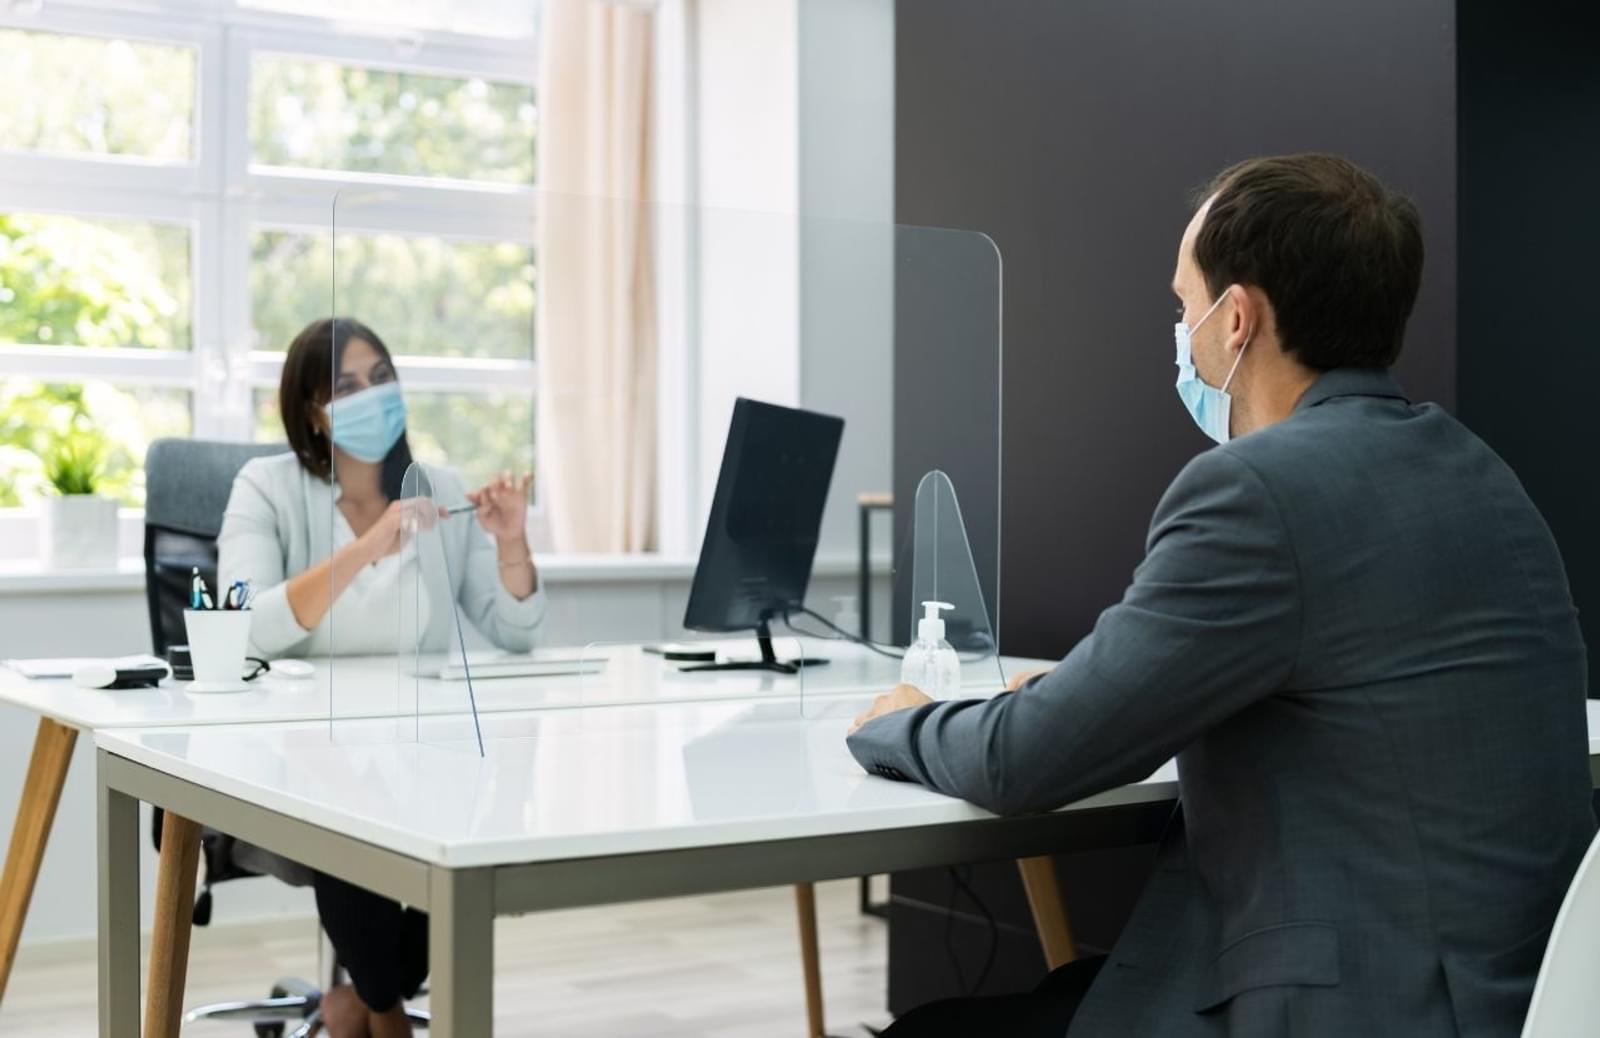 Woman and man sitting across a table from each other wearing medical masks